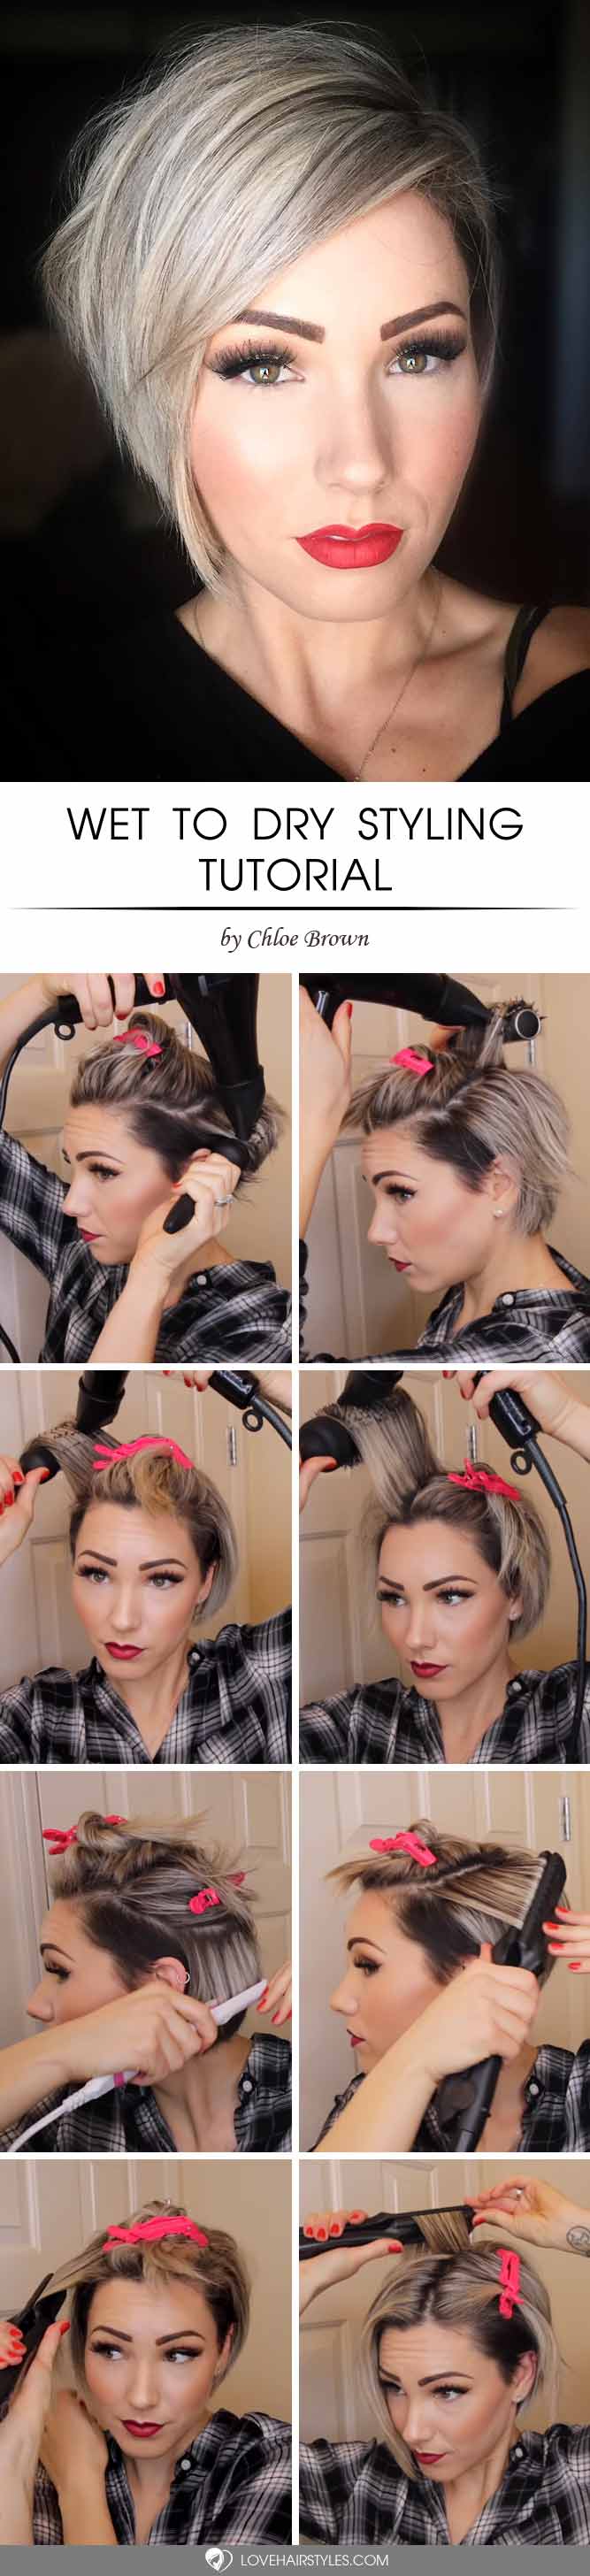 Wet To Dry Styling #shorthair #tutorial #hairstyles